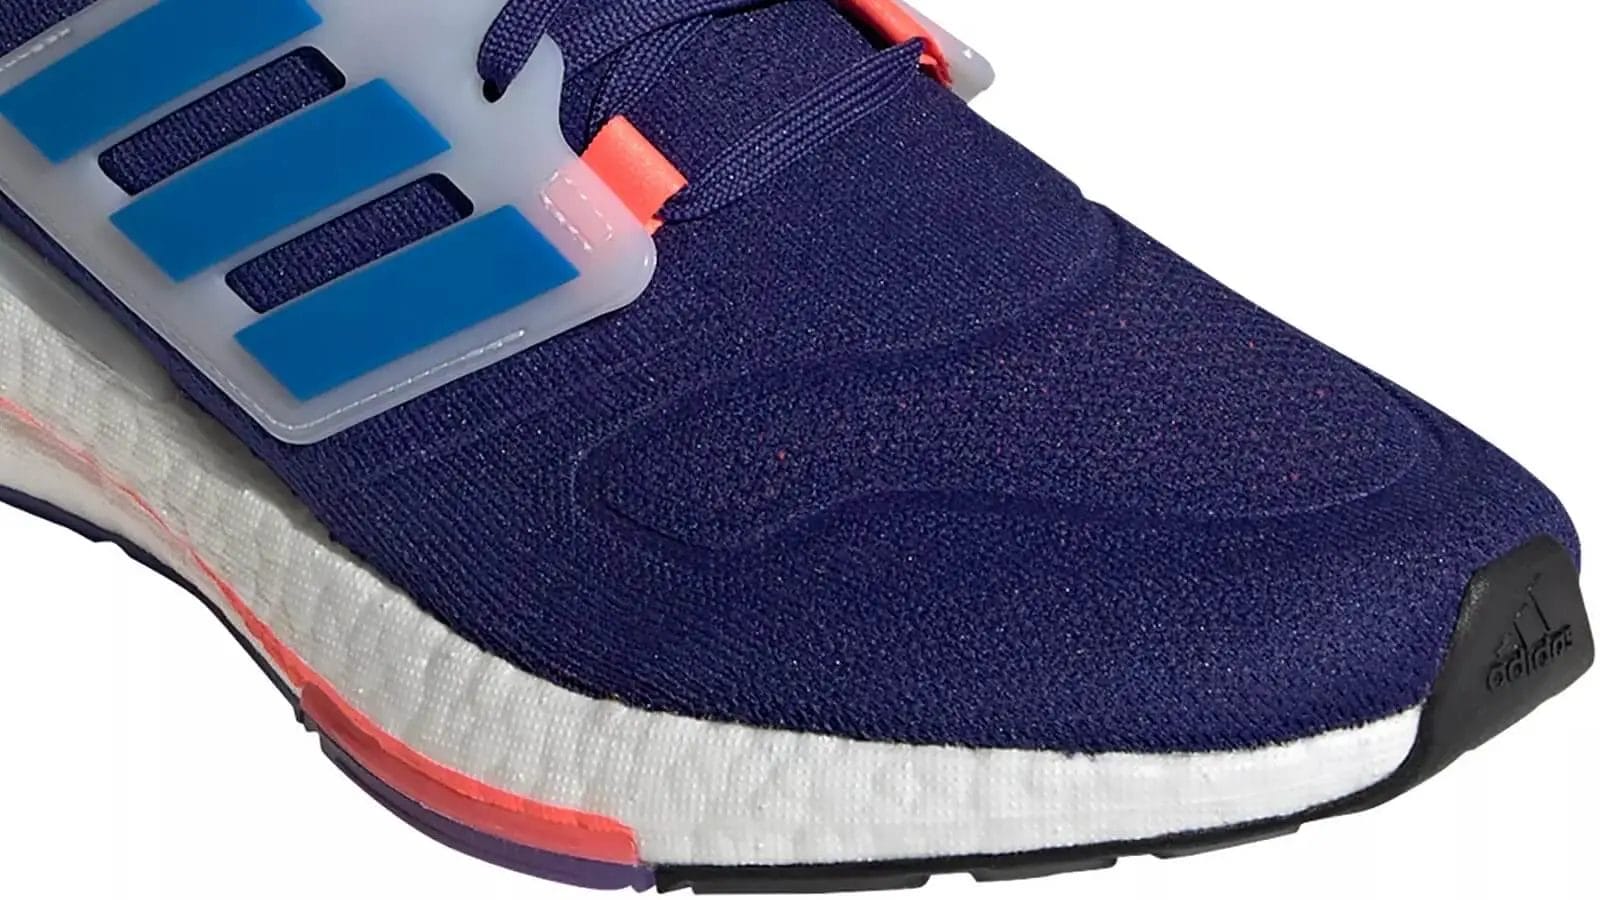 Close up view of the toe box on the adidas ultraboost 22 shoe for running.